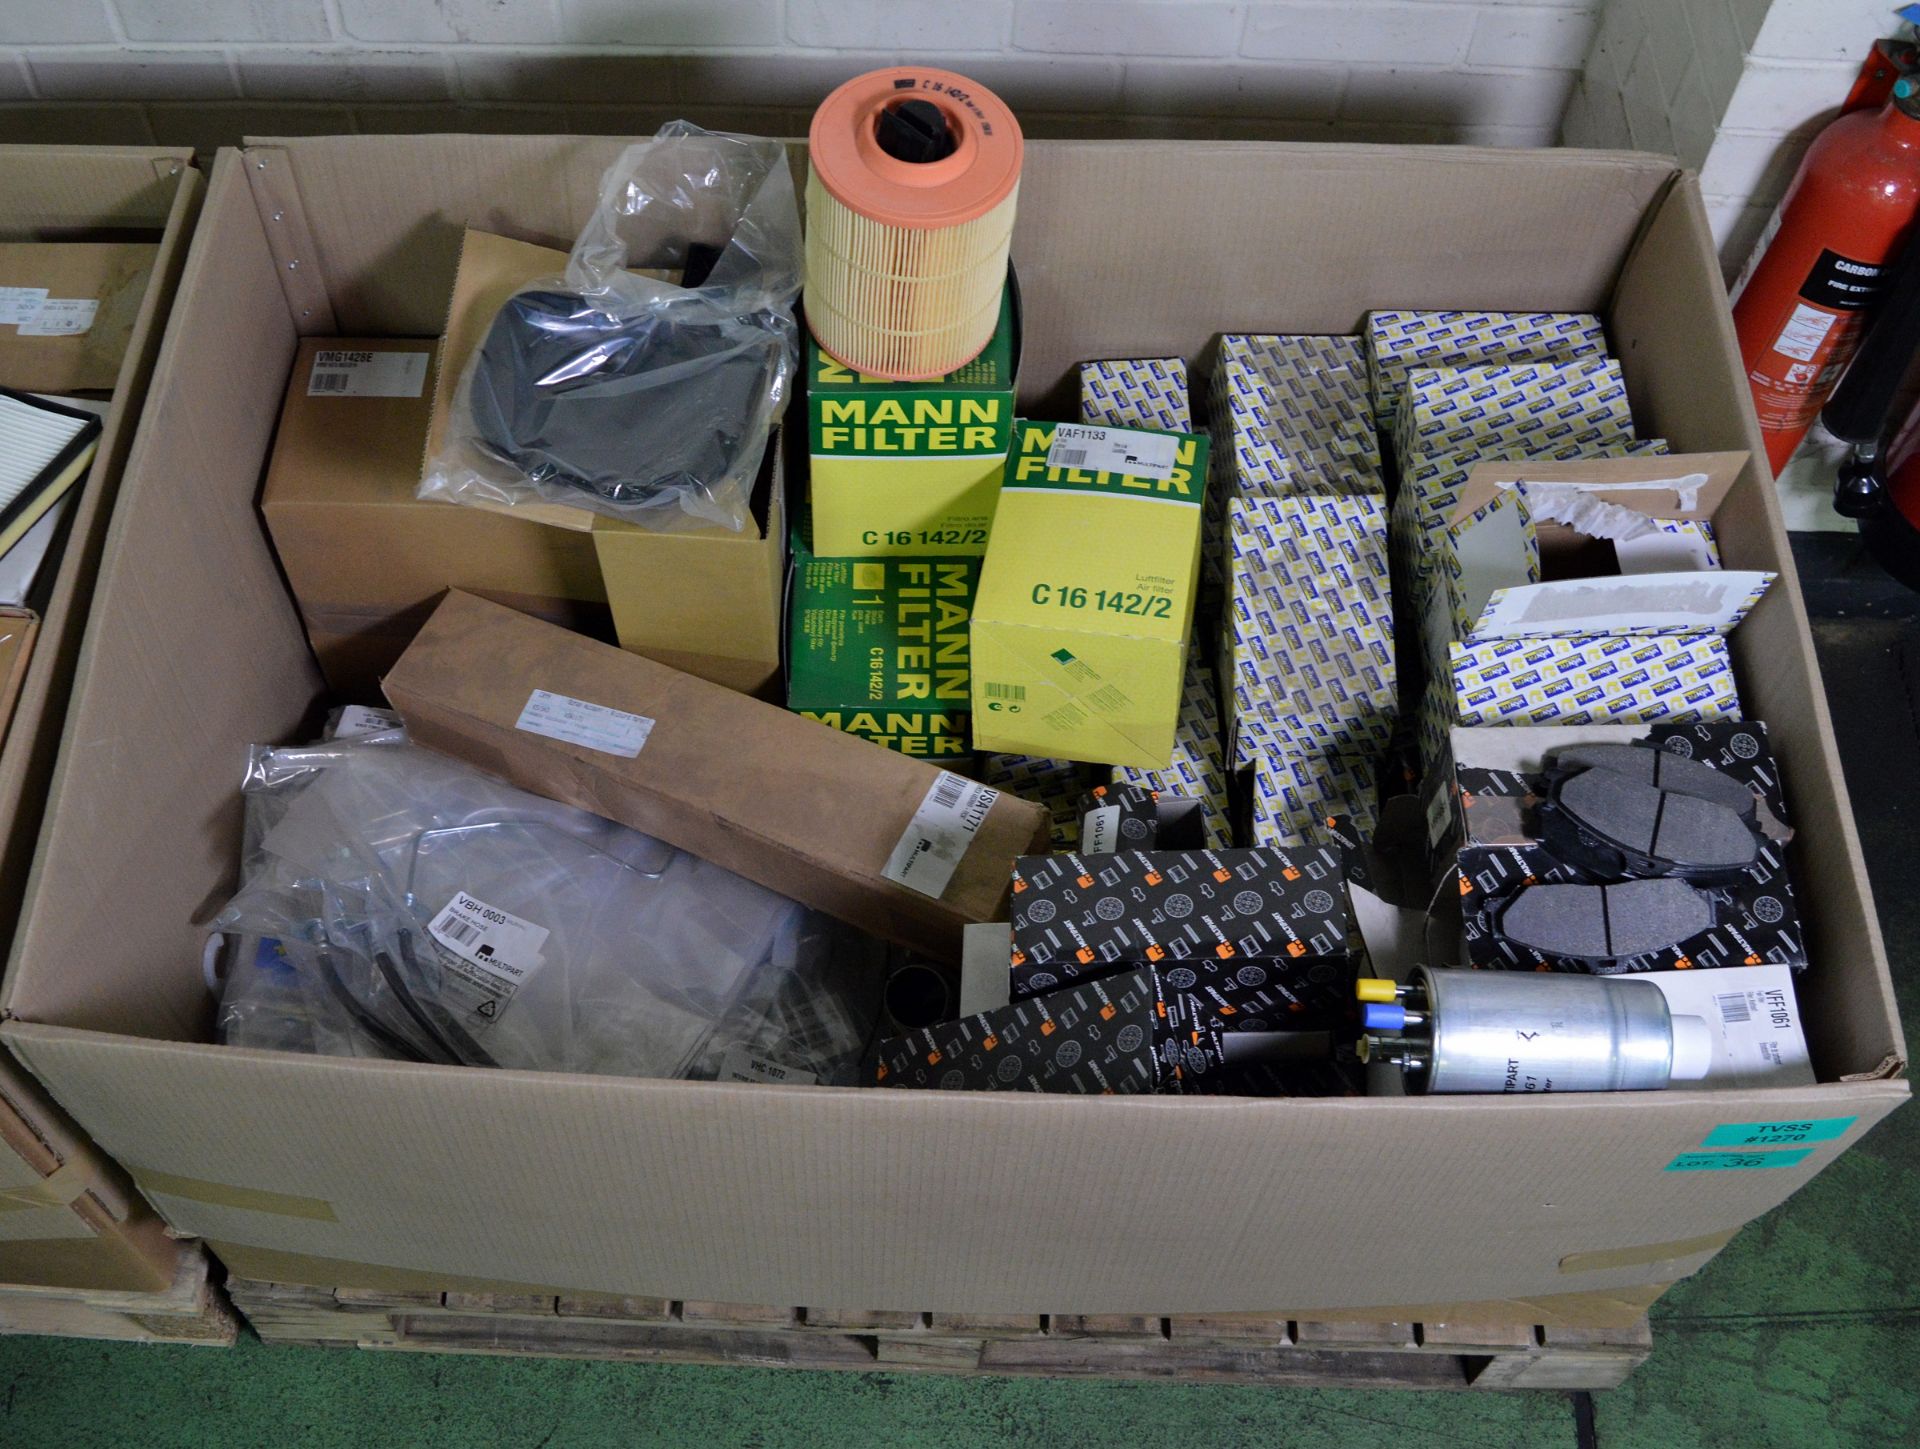 Vehicle parts - air filters, fuel filters, pad sets, handbrake cables - see picture for itinerary